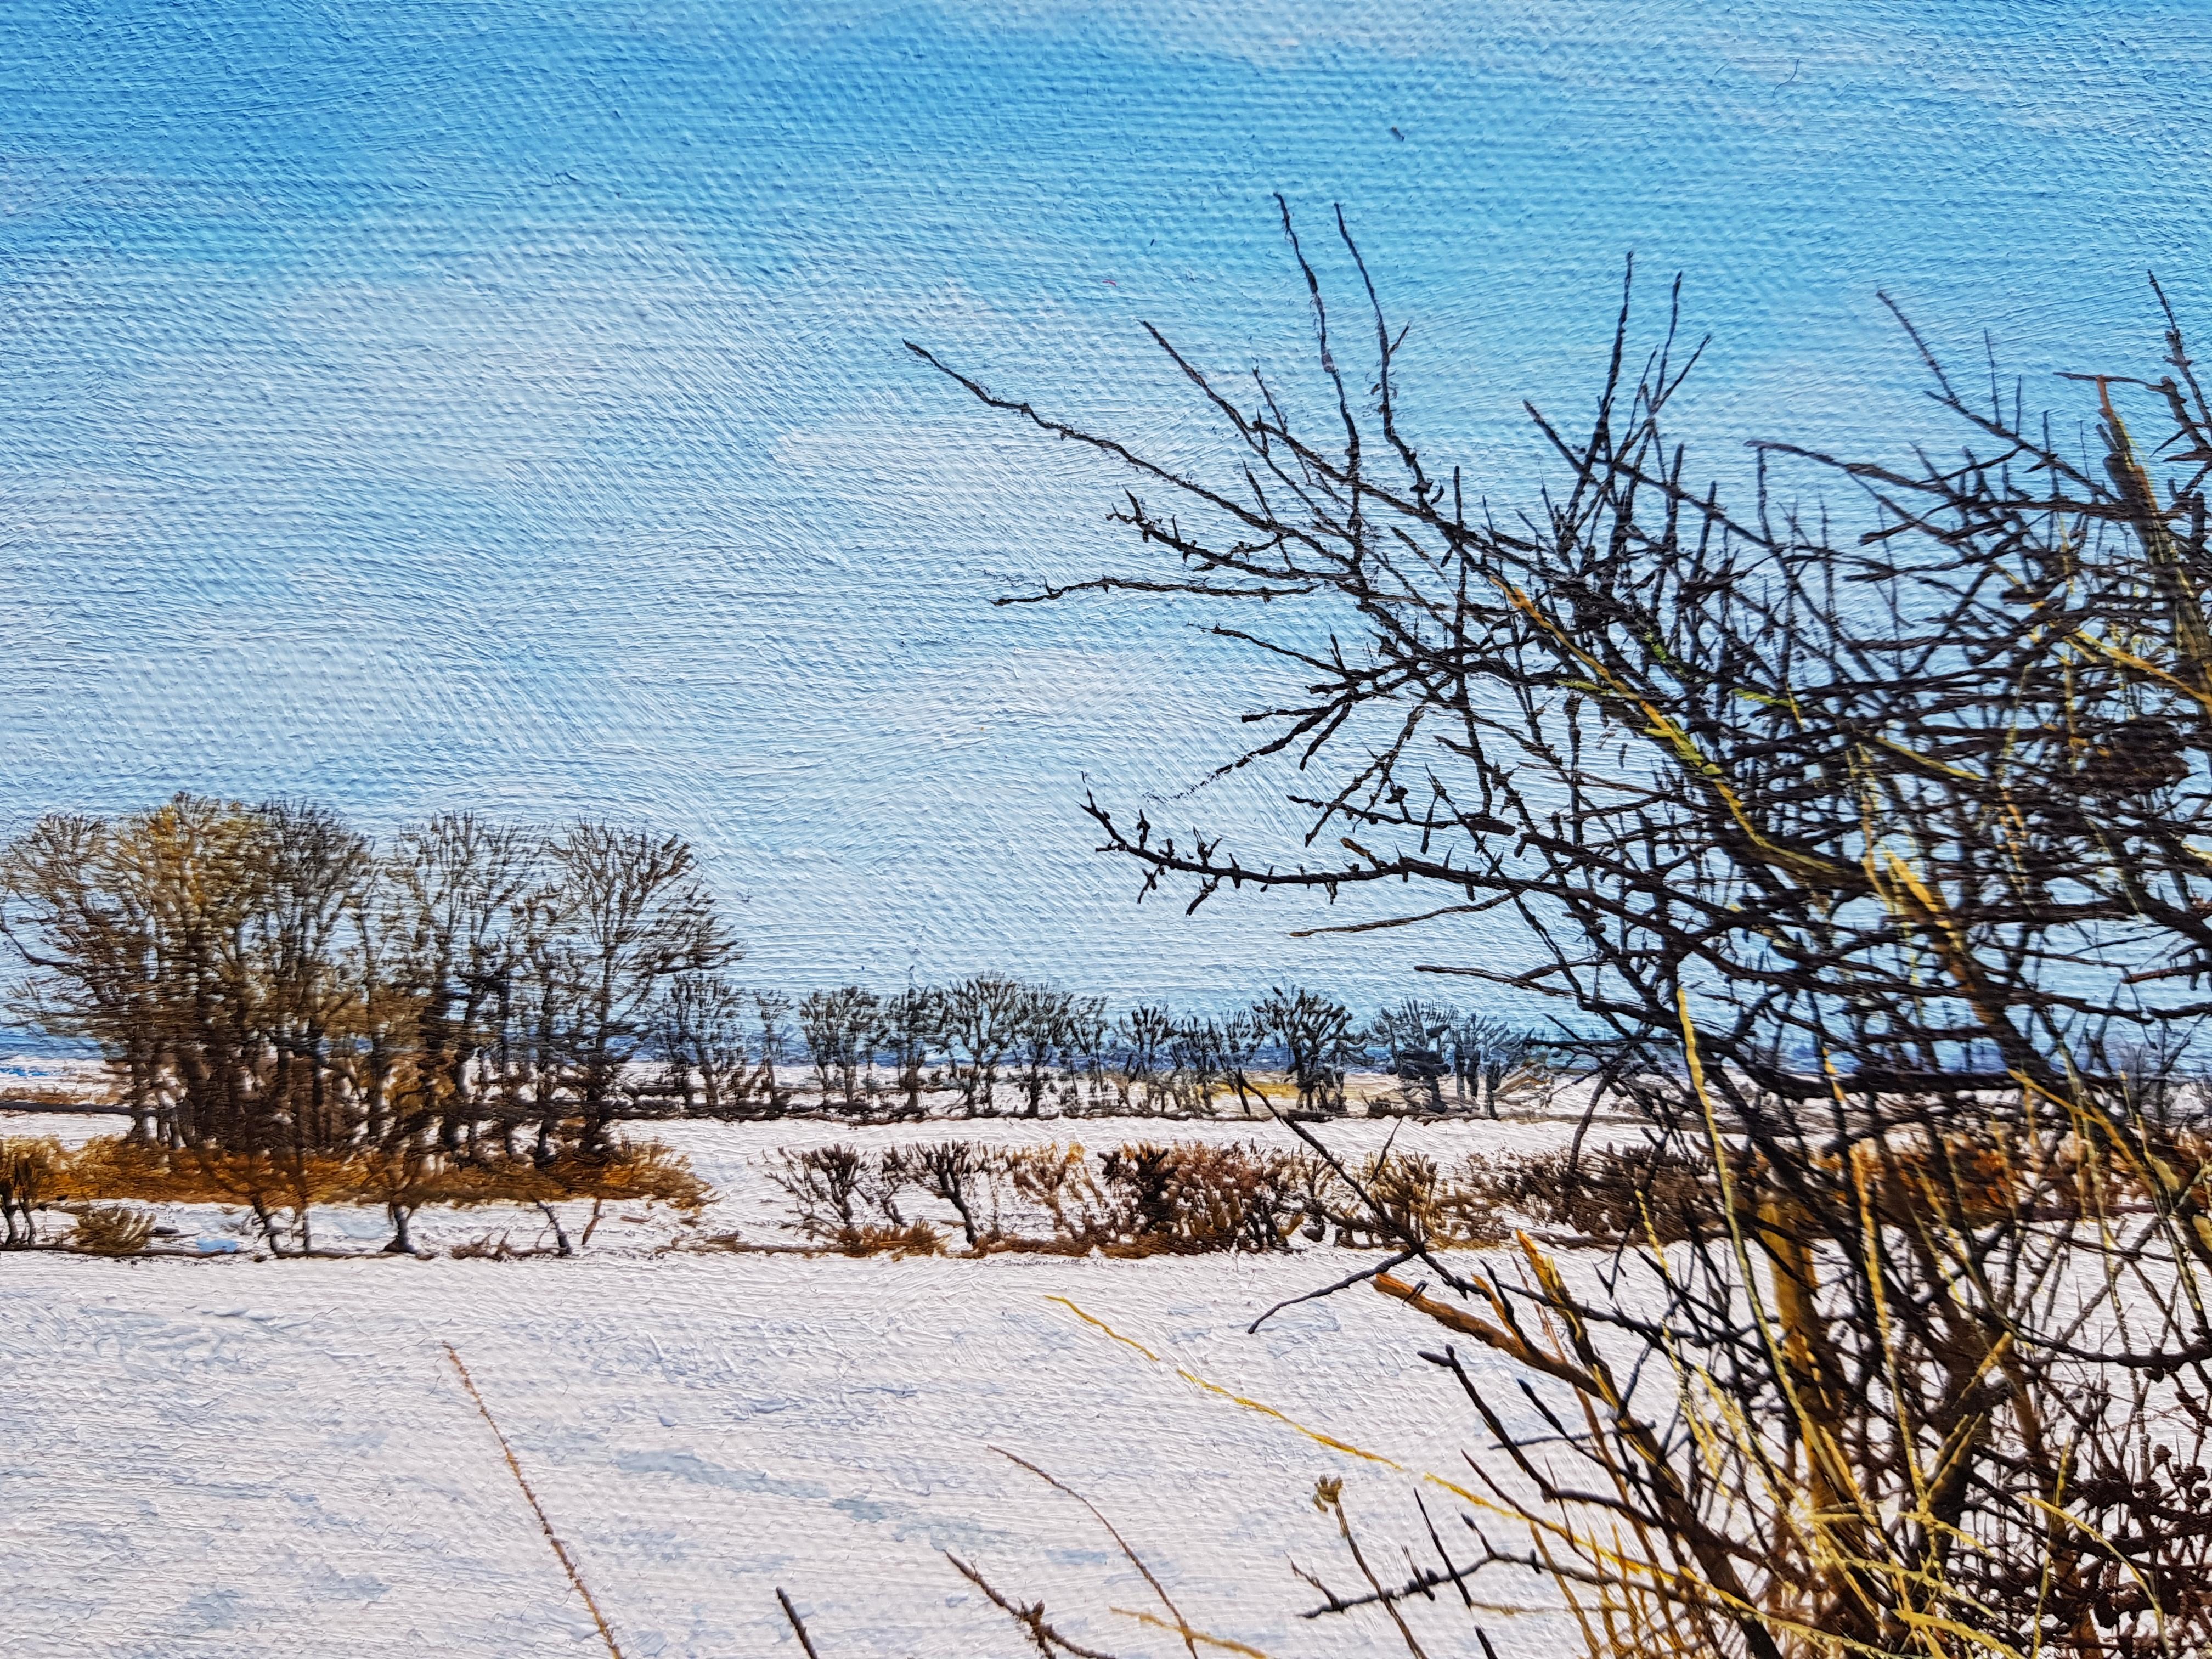 'The Lost Wood' A Realist Snowy Landscape by Contemporary artist Martin Taylor 1